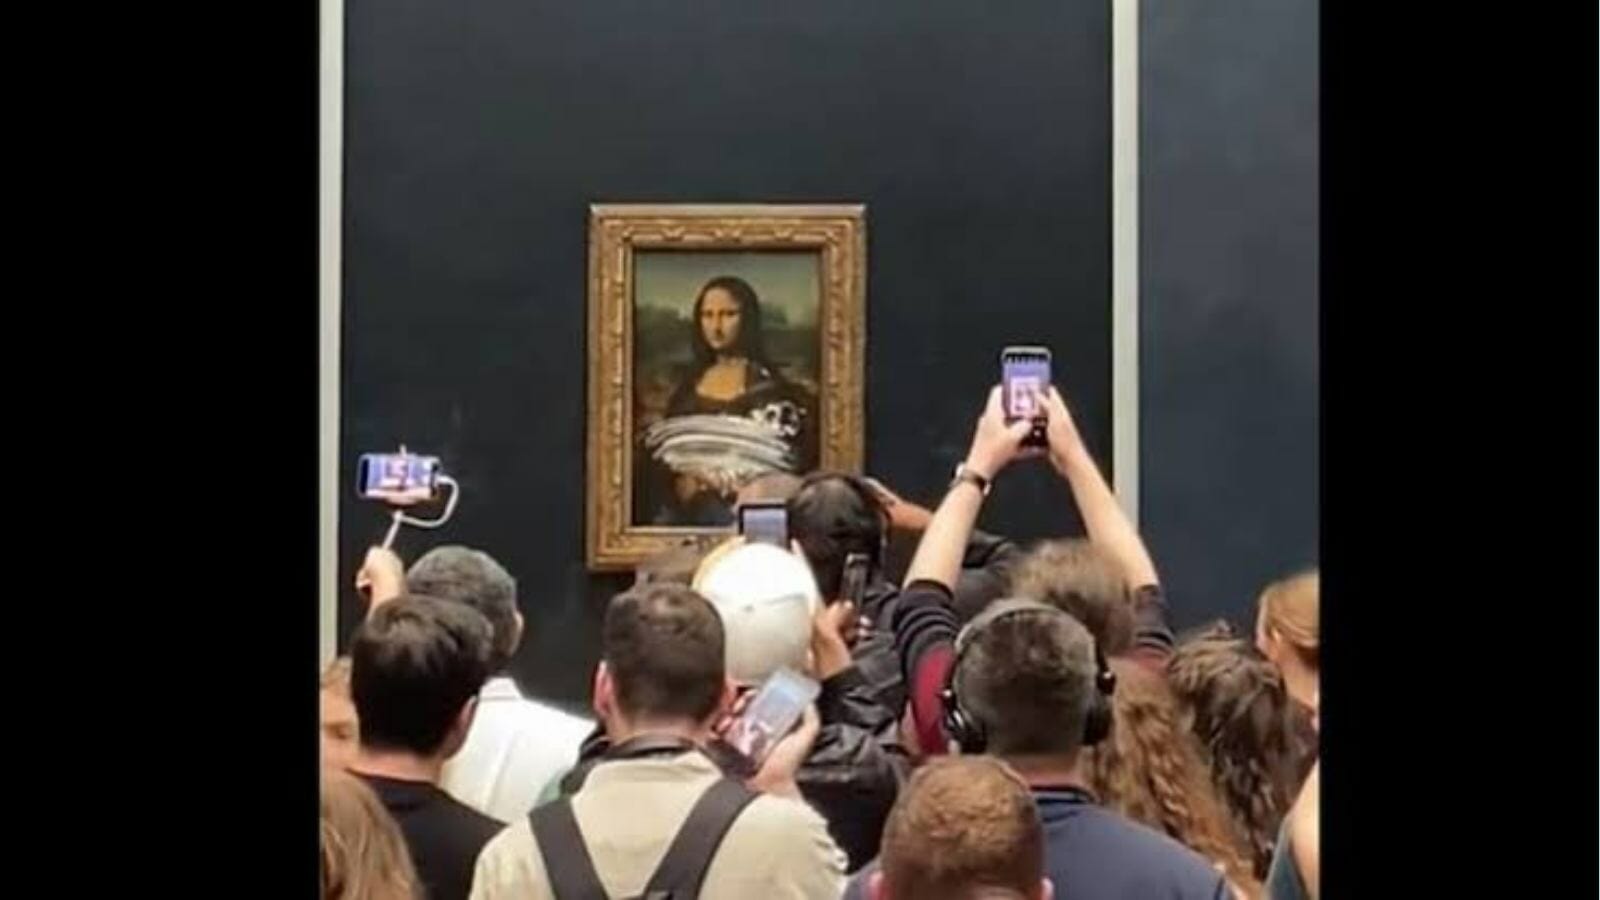 The glass panel protecting Mona Lisa had cake spread all over it